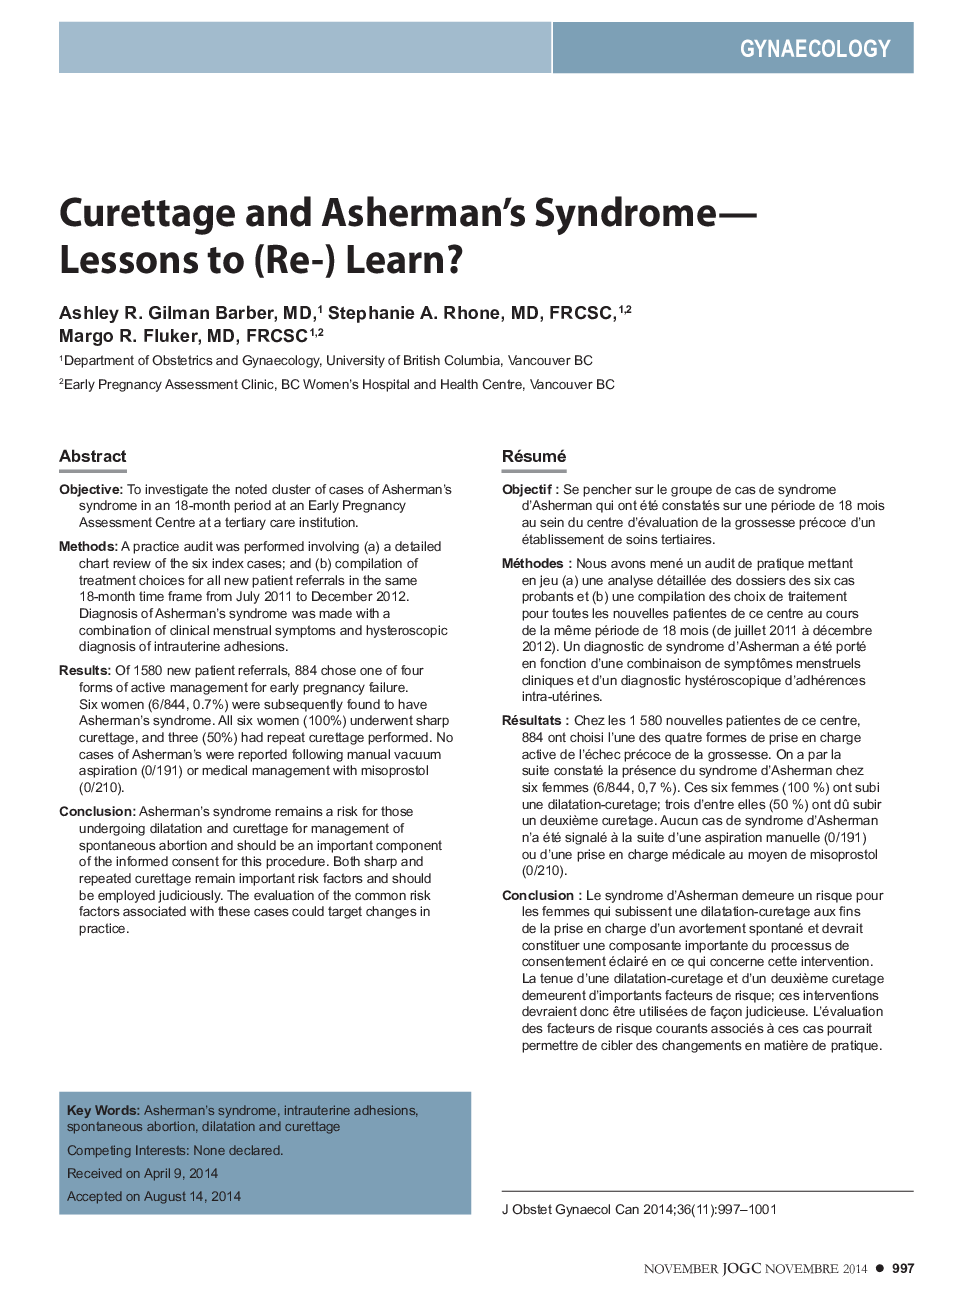 Curettage and Asherman's Syndrome-Lessons to (Re-) Learn?